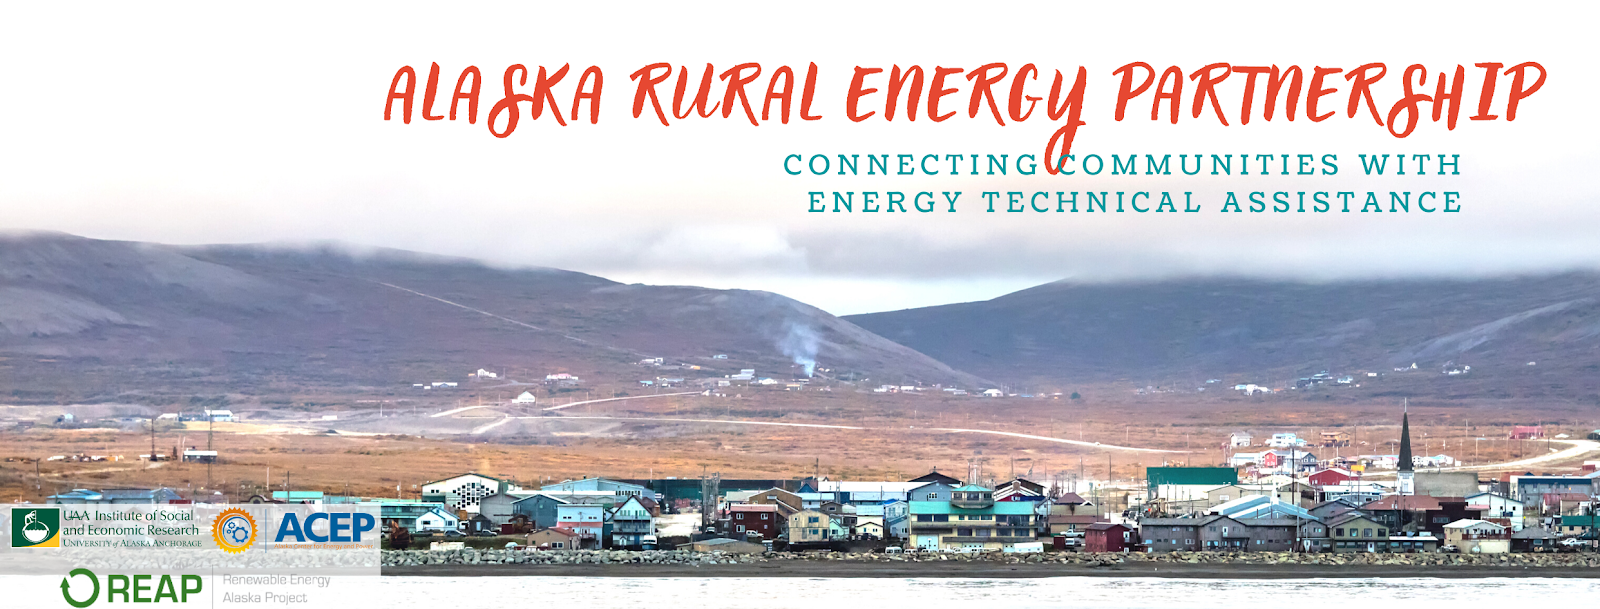 Communities - Apply for Technical Assistance to Improve Energy Resilience